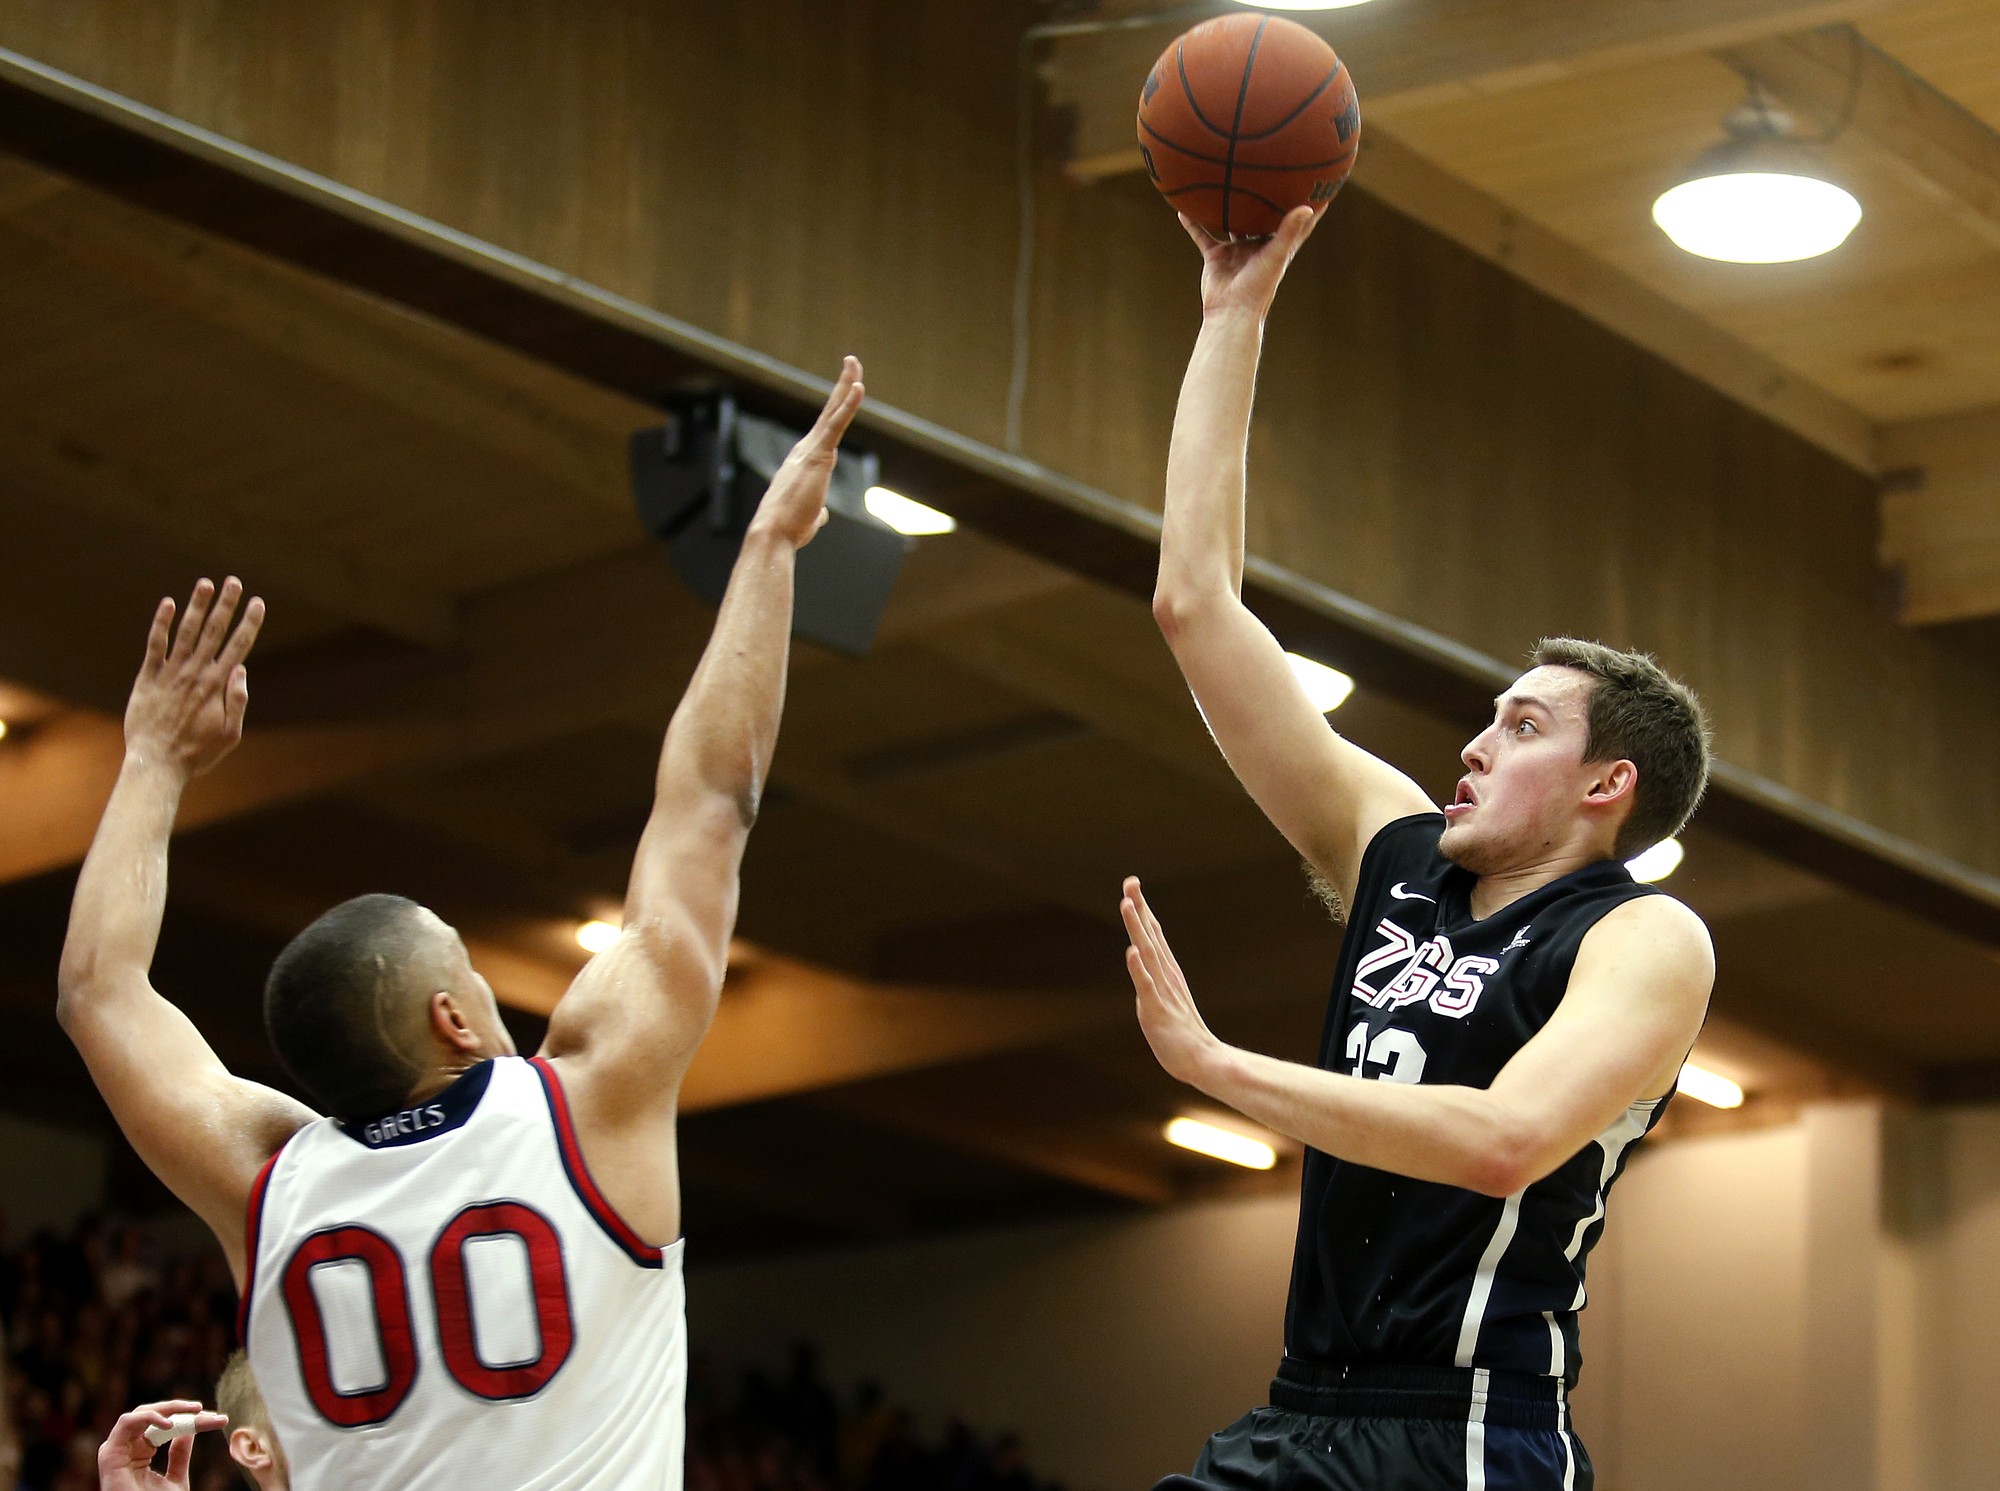 Gonzaga forward Kyle Wiltjer, right, shoots the ball over St. Mary's forward Brad Waldow during the first half  Saturday, Feb. 21, 2015, in Moraga, Calif. Gonzaga defeated St. Mary's 70-60.